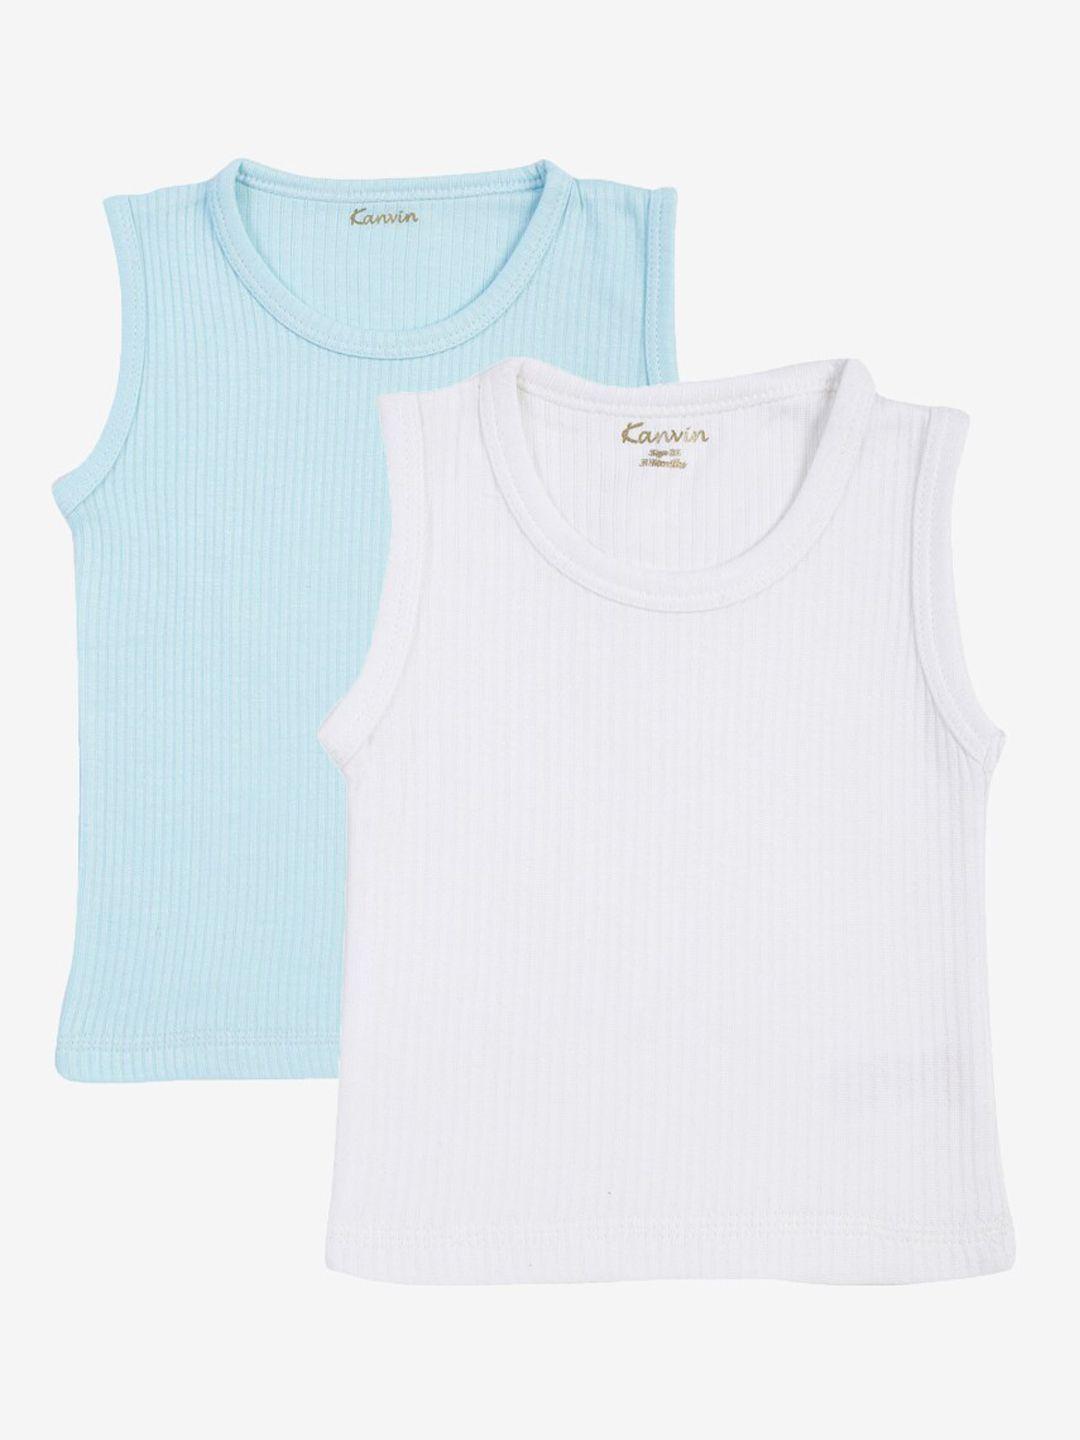 kanvin-boys-pack-of-2-turquoise-&-white-cotton-ribber-thermal-tops